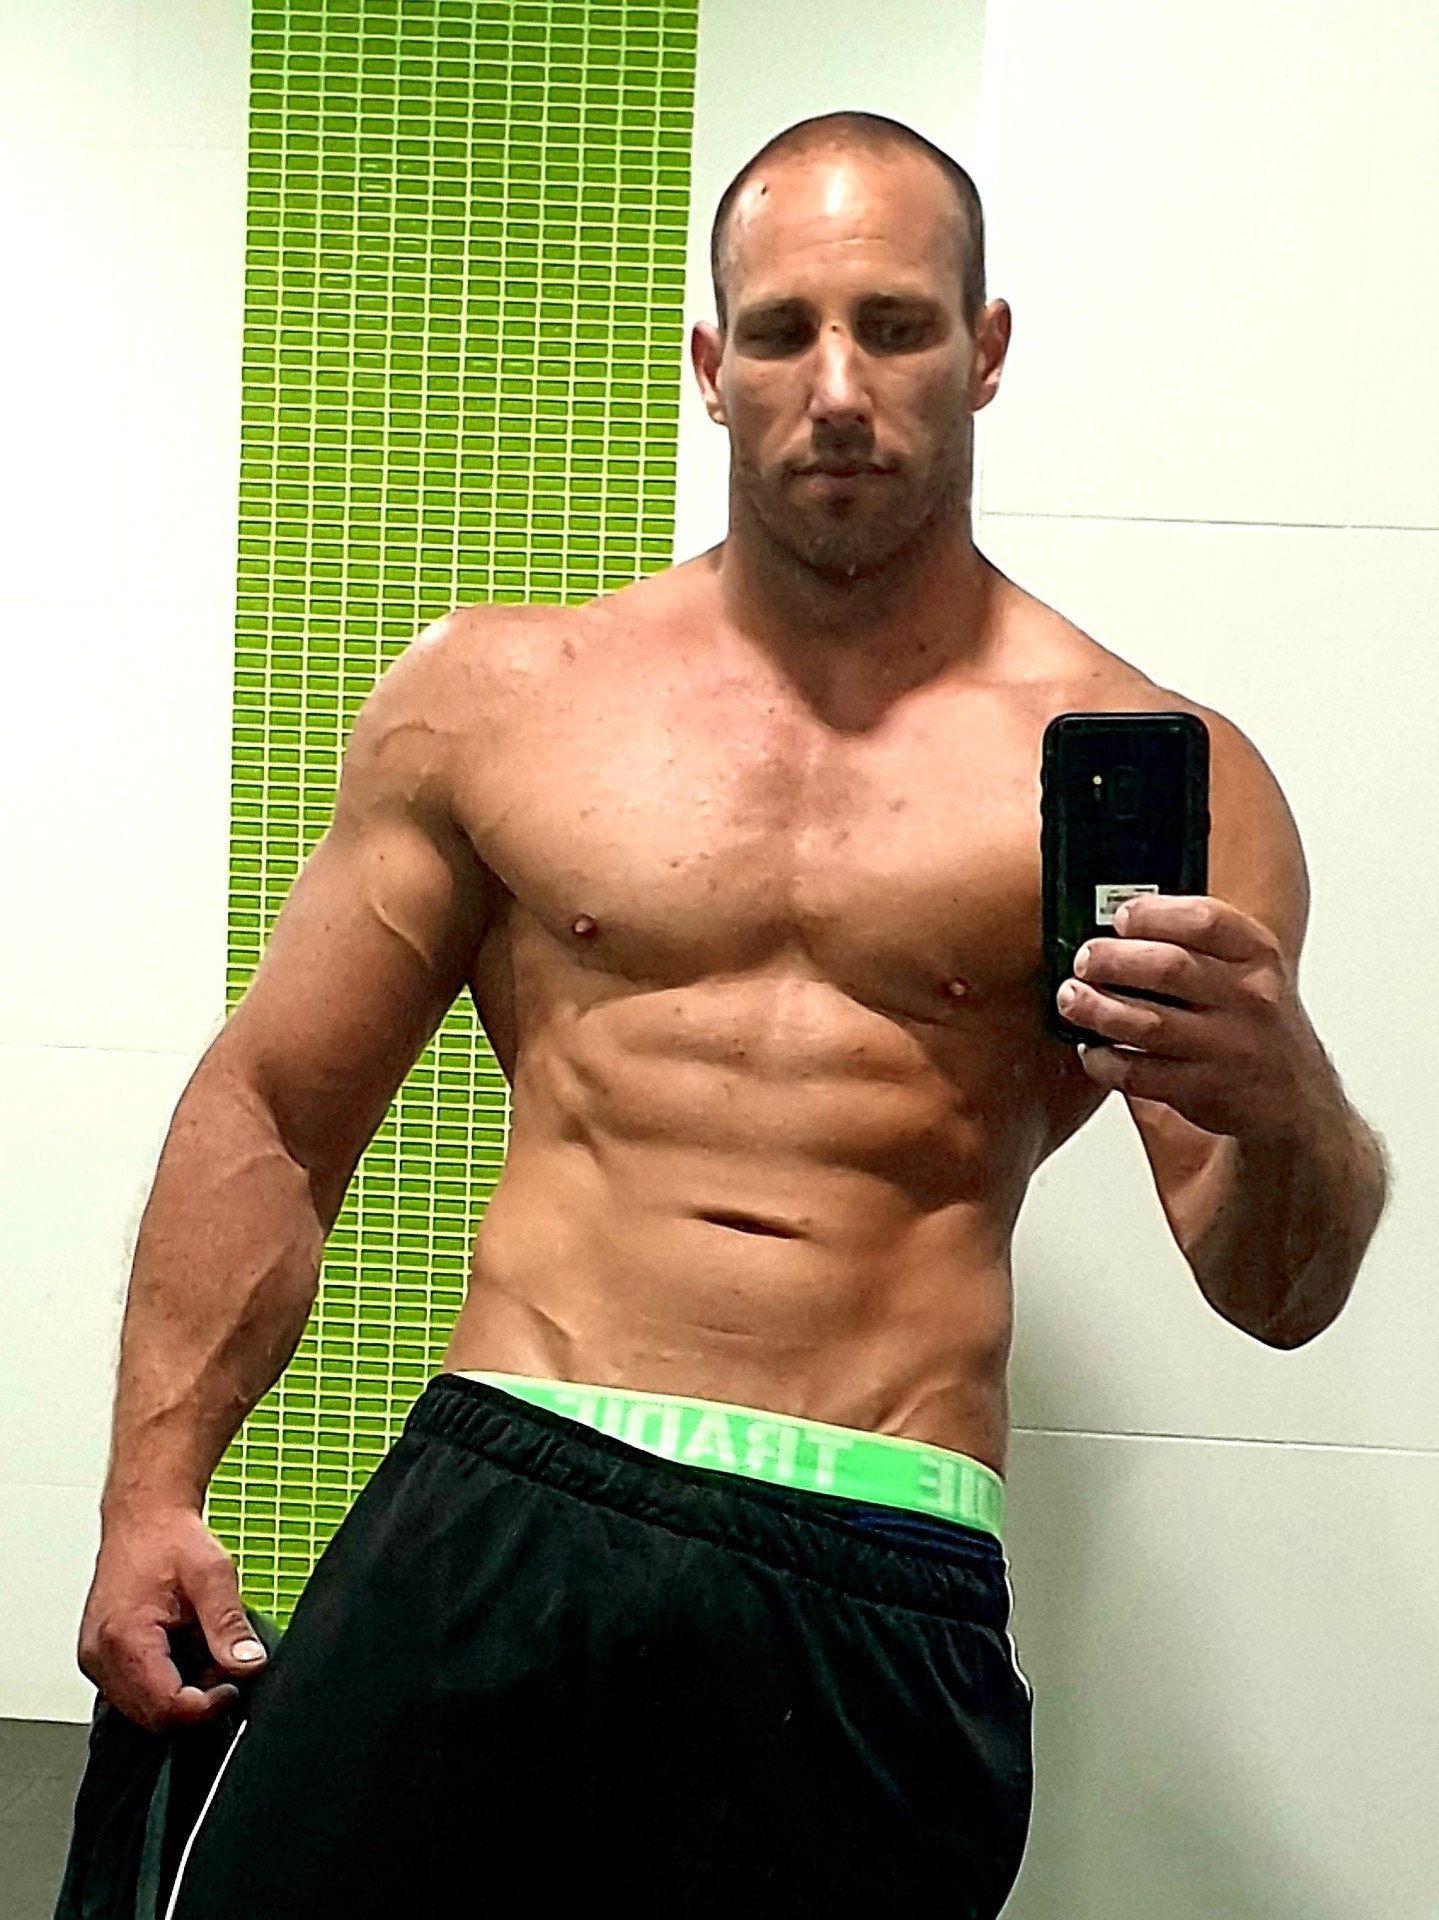 Watch the Photo by craezy322 with the username @craezy322, posted on December 16, 2020 and the text says '#muscular #masculine #fit #selfy #man'